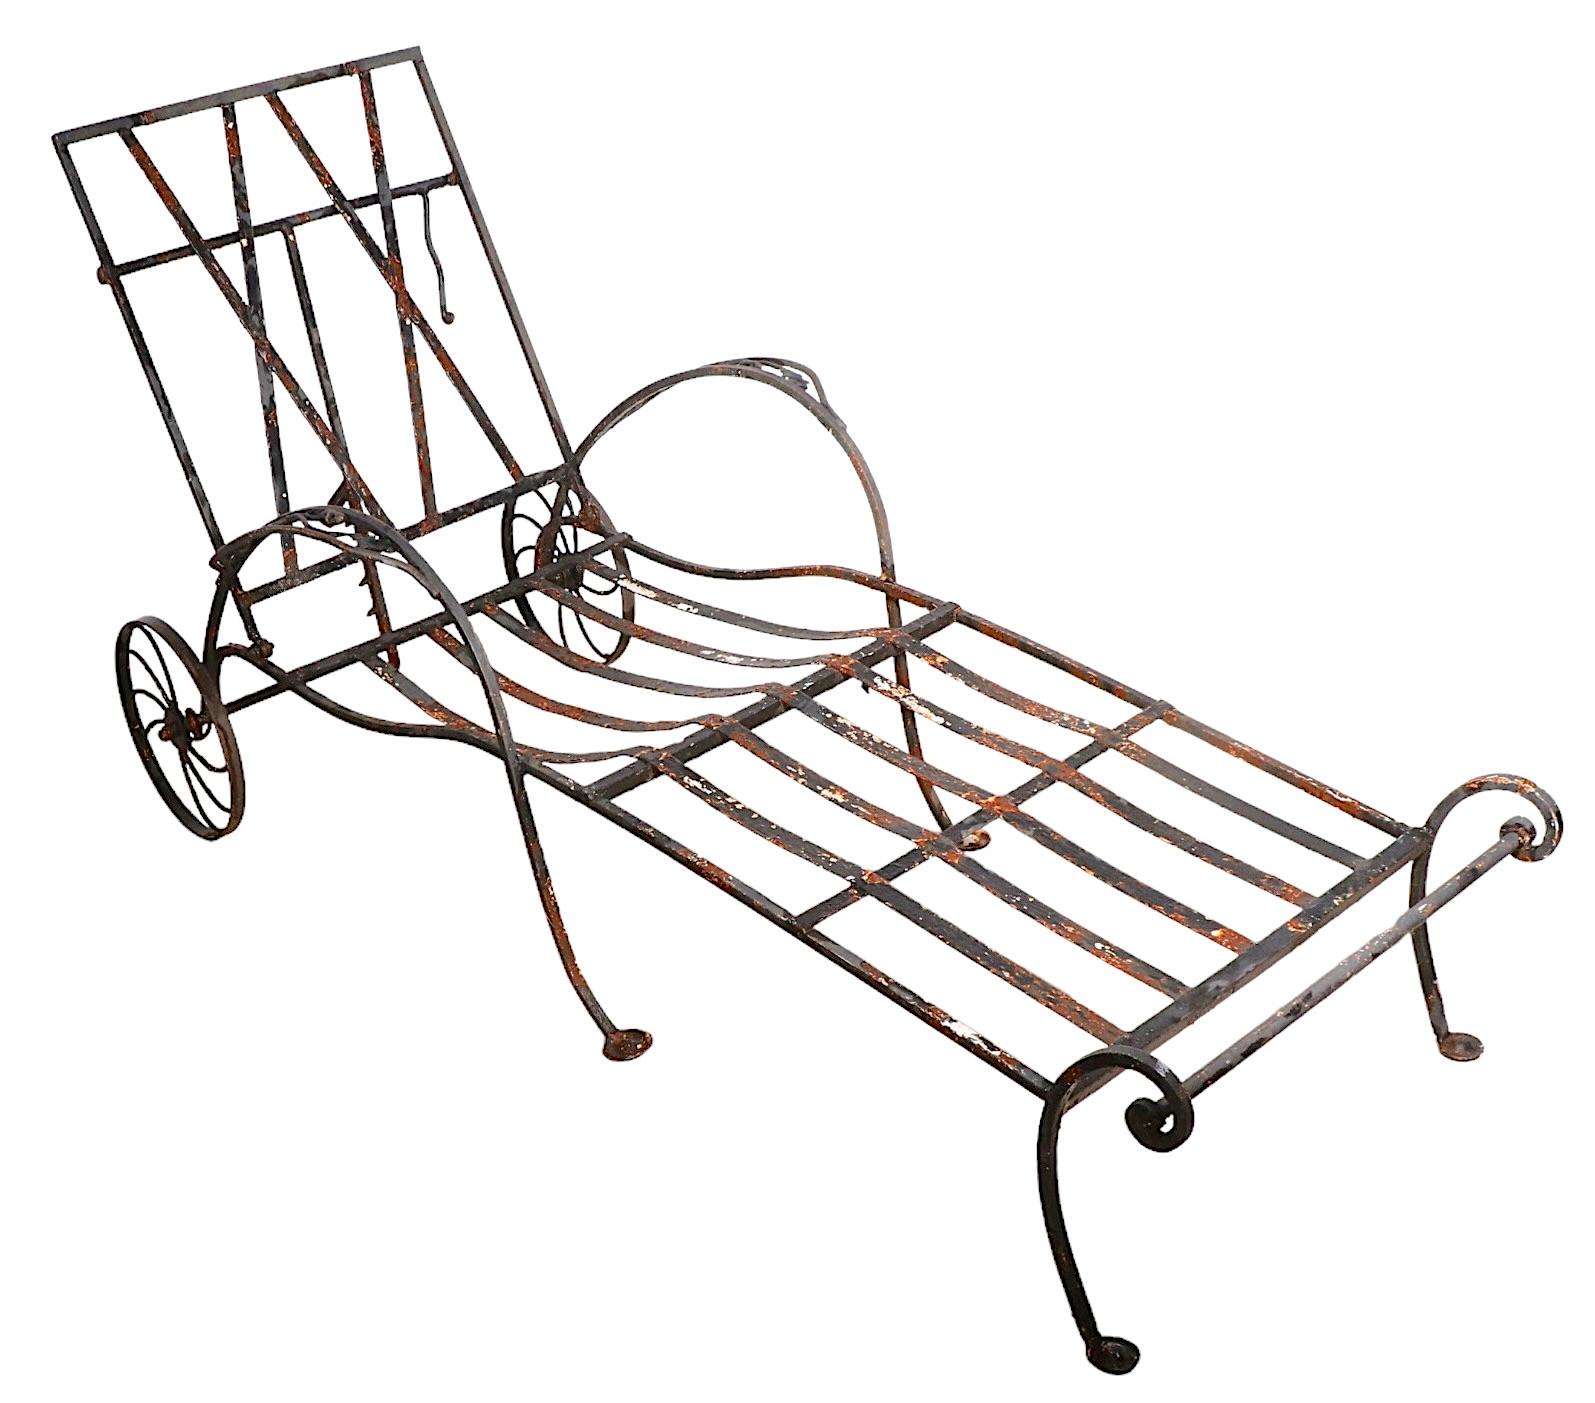 Adjustable wrought iron chaise lounge, made by John Salterini, as part of the Mt. Vernon series circa 1940's. This example displays the skills of the master of this genre, in both design and craftsmanship. The chaise has a reclining back, and rear